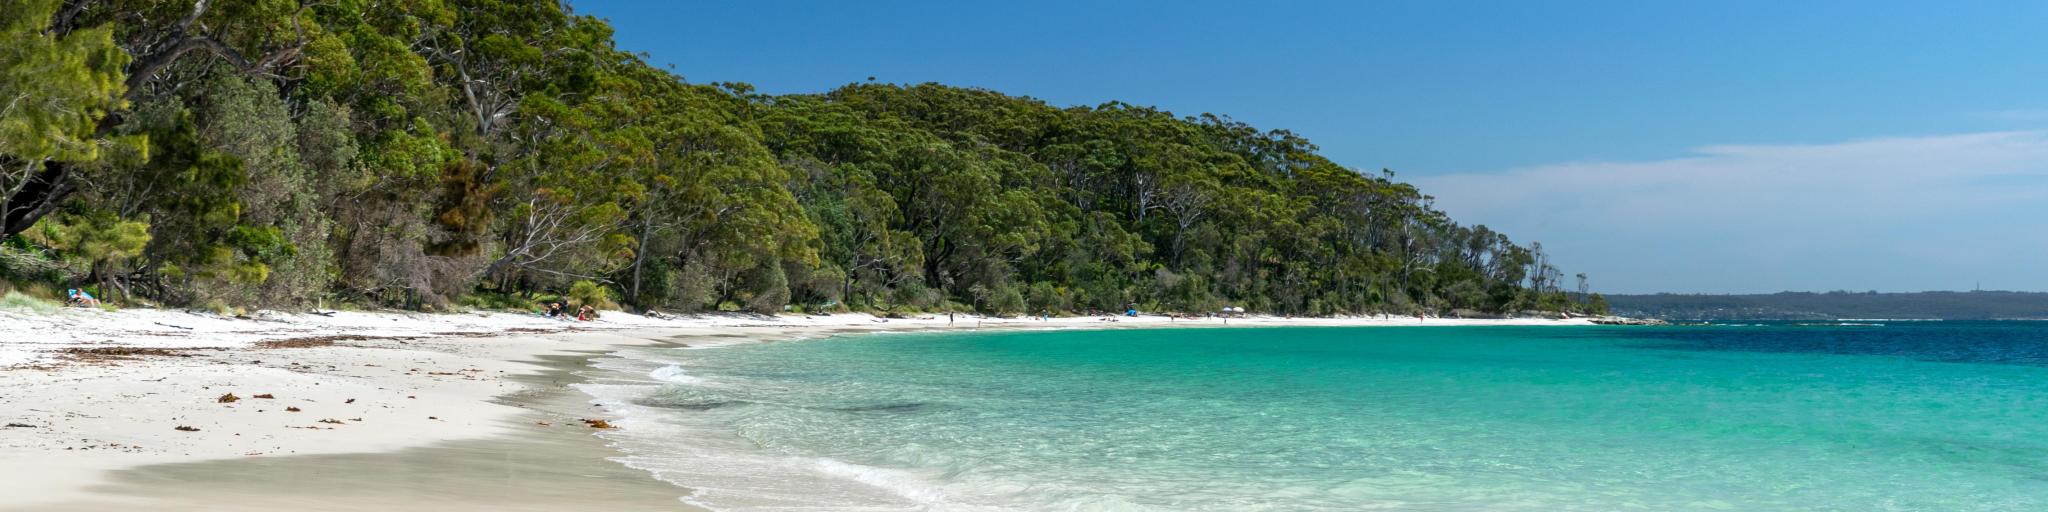 Jervis Bay, Australia with a stunning beach surrounded by rocks in the foreground, crystal clear water and dense woodland in the background.